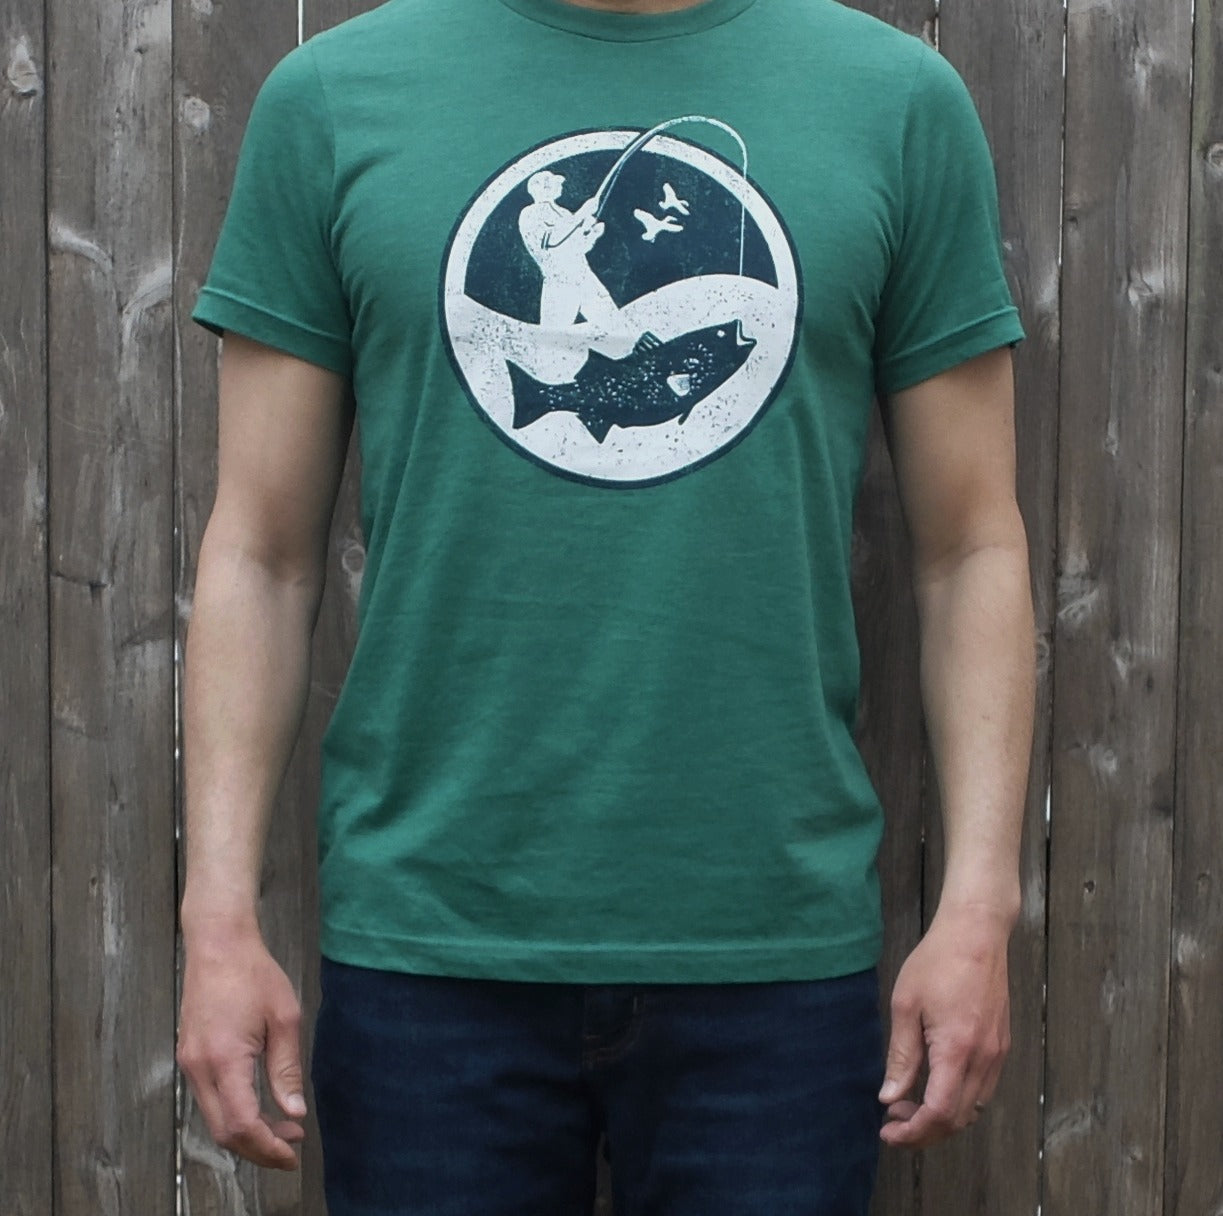 man wearing heather green t-shirt with round white and navy surf fisherman logo